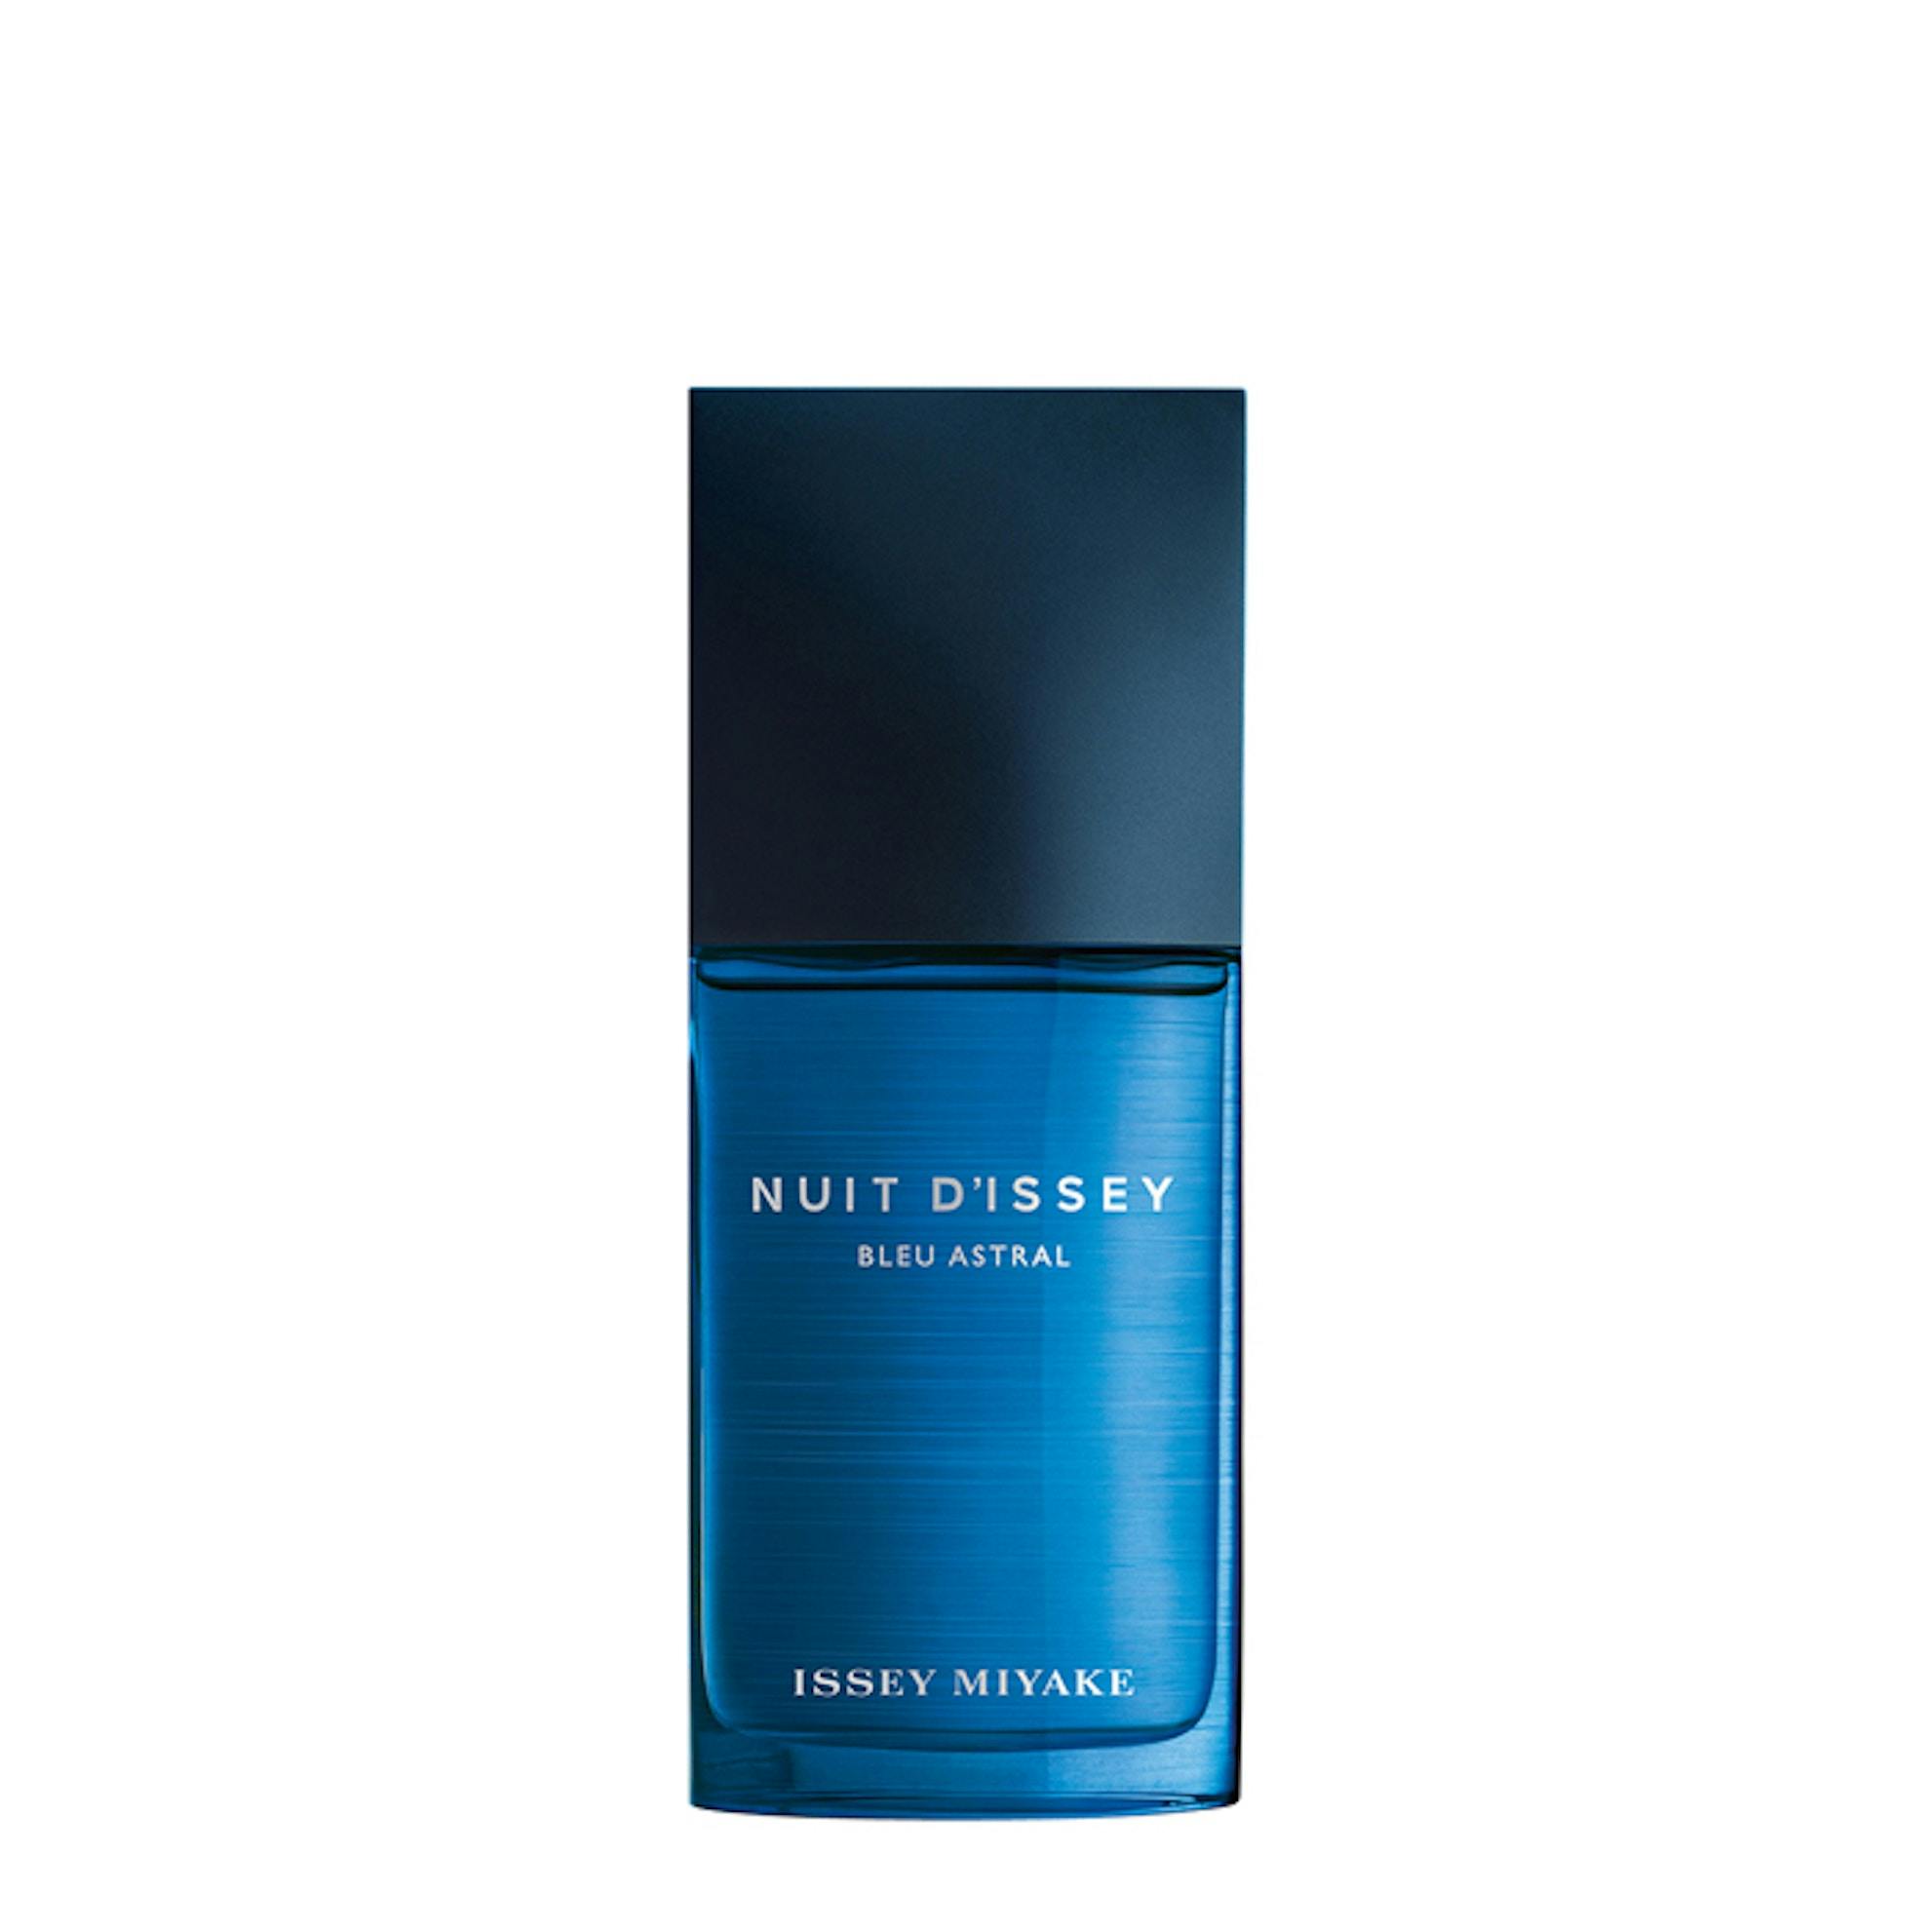 ISSEY MIYAKE Nuit D'issey Spray for Men for sale